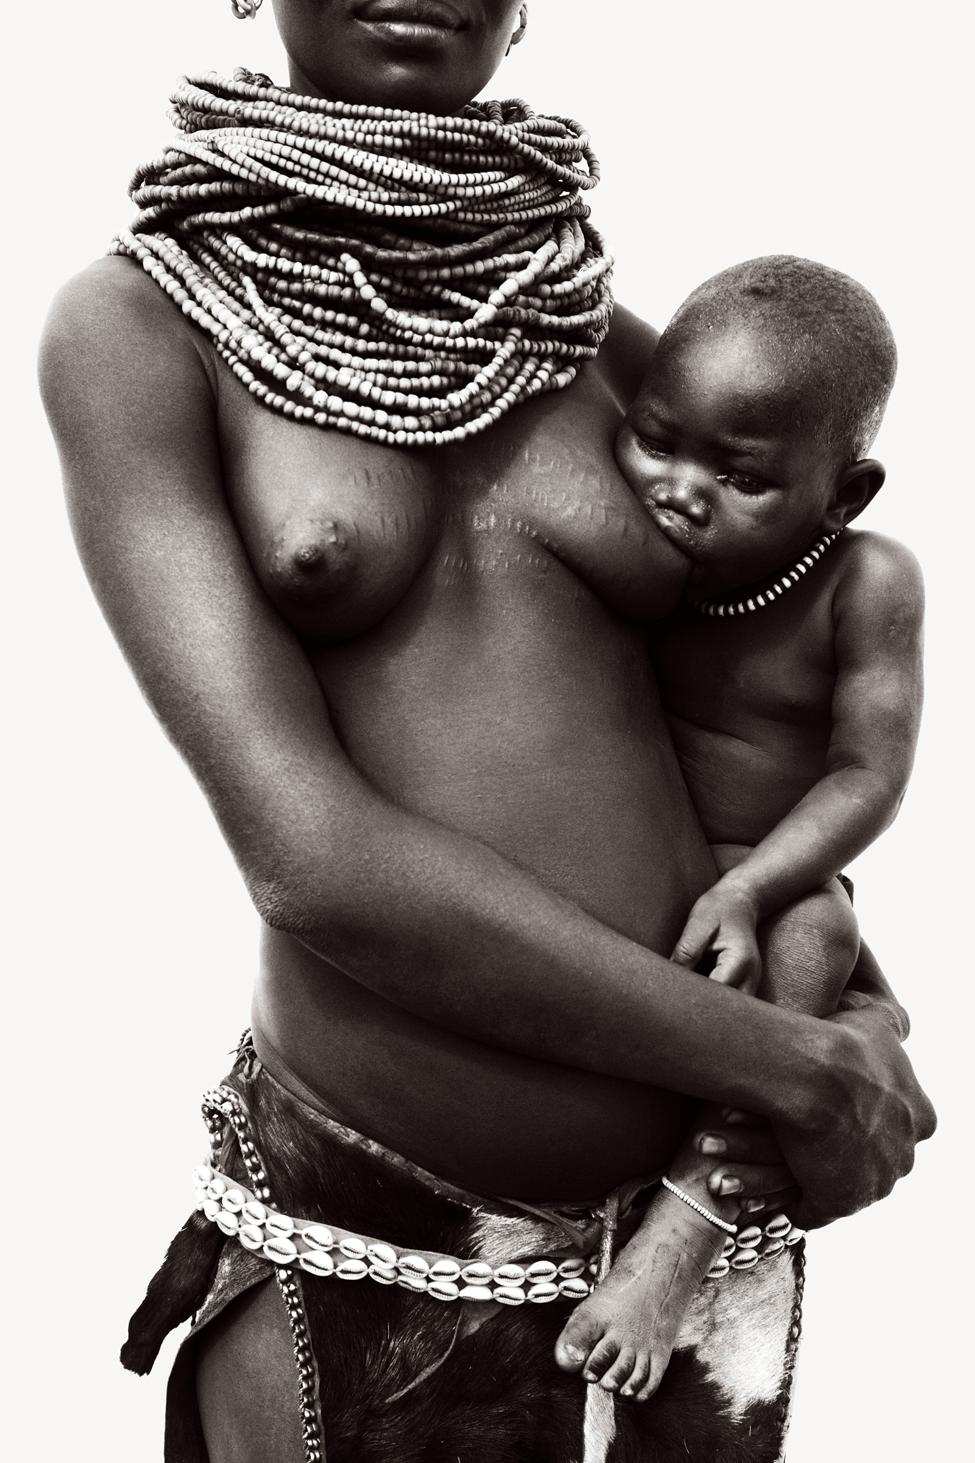 Drew Doggett Portrait Photograph - Mother Nursing Her Child, Wearing Traditional Tribal Jewelry, Ethiopia, Calming